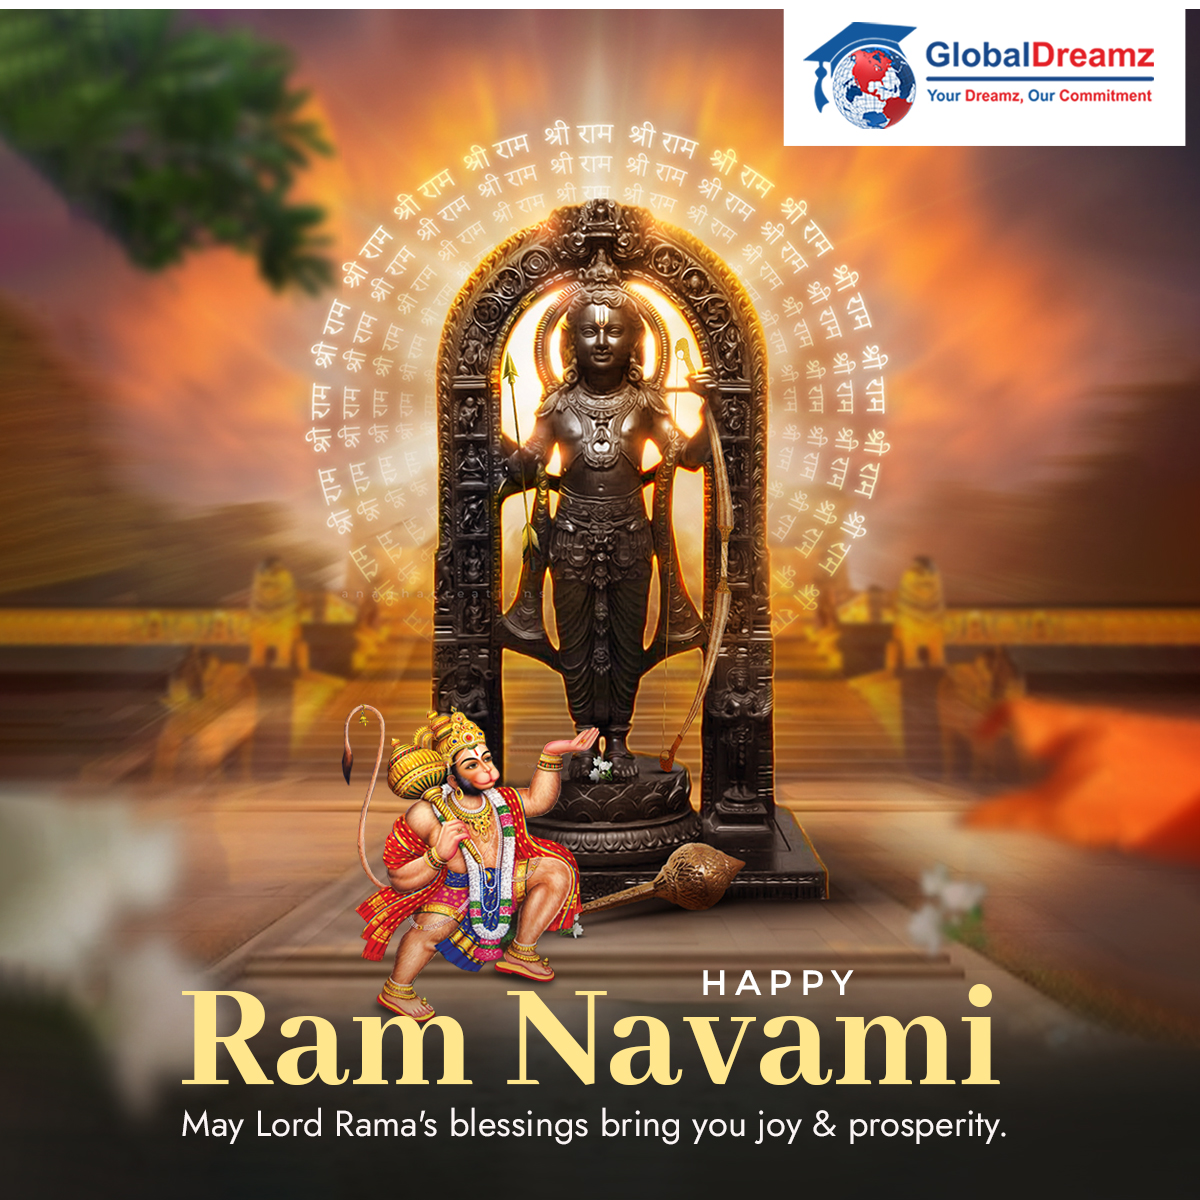 This Ram Navami 🌷Embark on a Journey of Enlightenment!✨ Let's celebrate the divine wisdom of Lord Rama and ignite the flame of knowledge within.

#GlobalDreamz #GlobalDreamzedu #ramnavami2024 #LordRama #FestivalOfRama #DivineCelebration #studyabroad #studyabroadlife #studytips